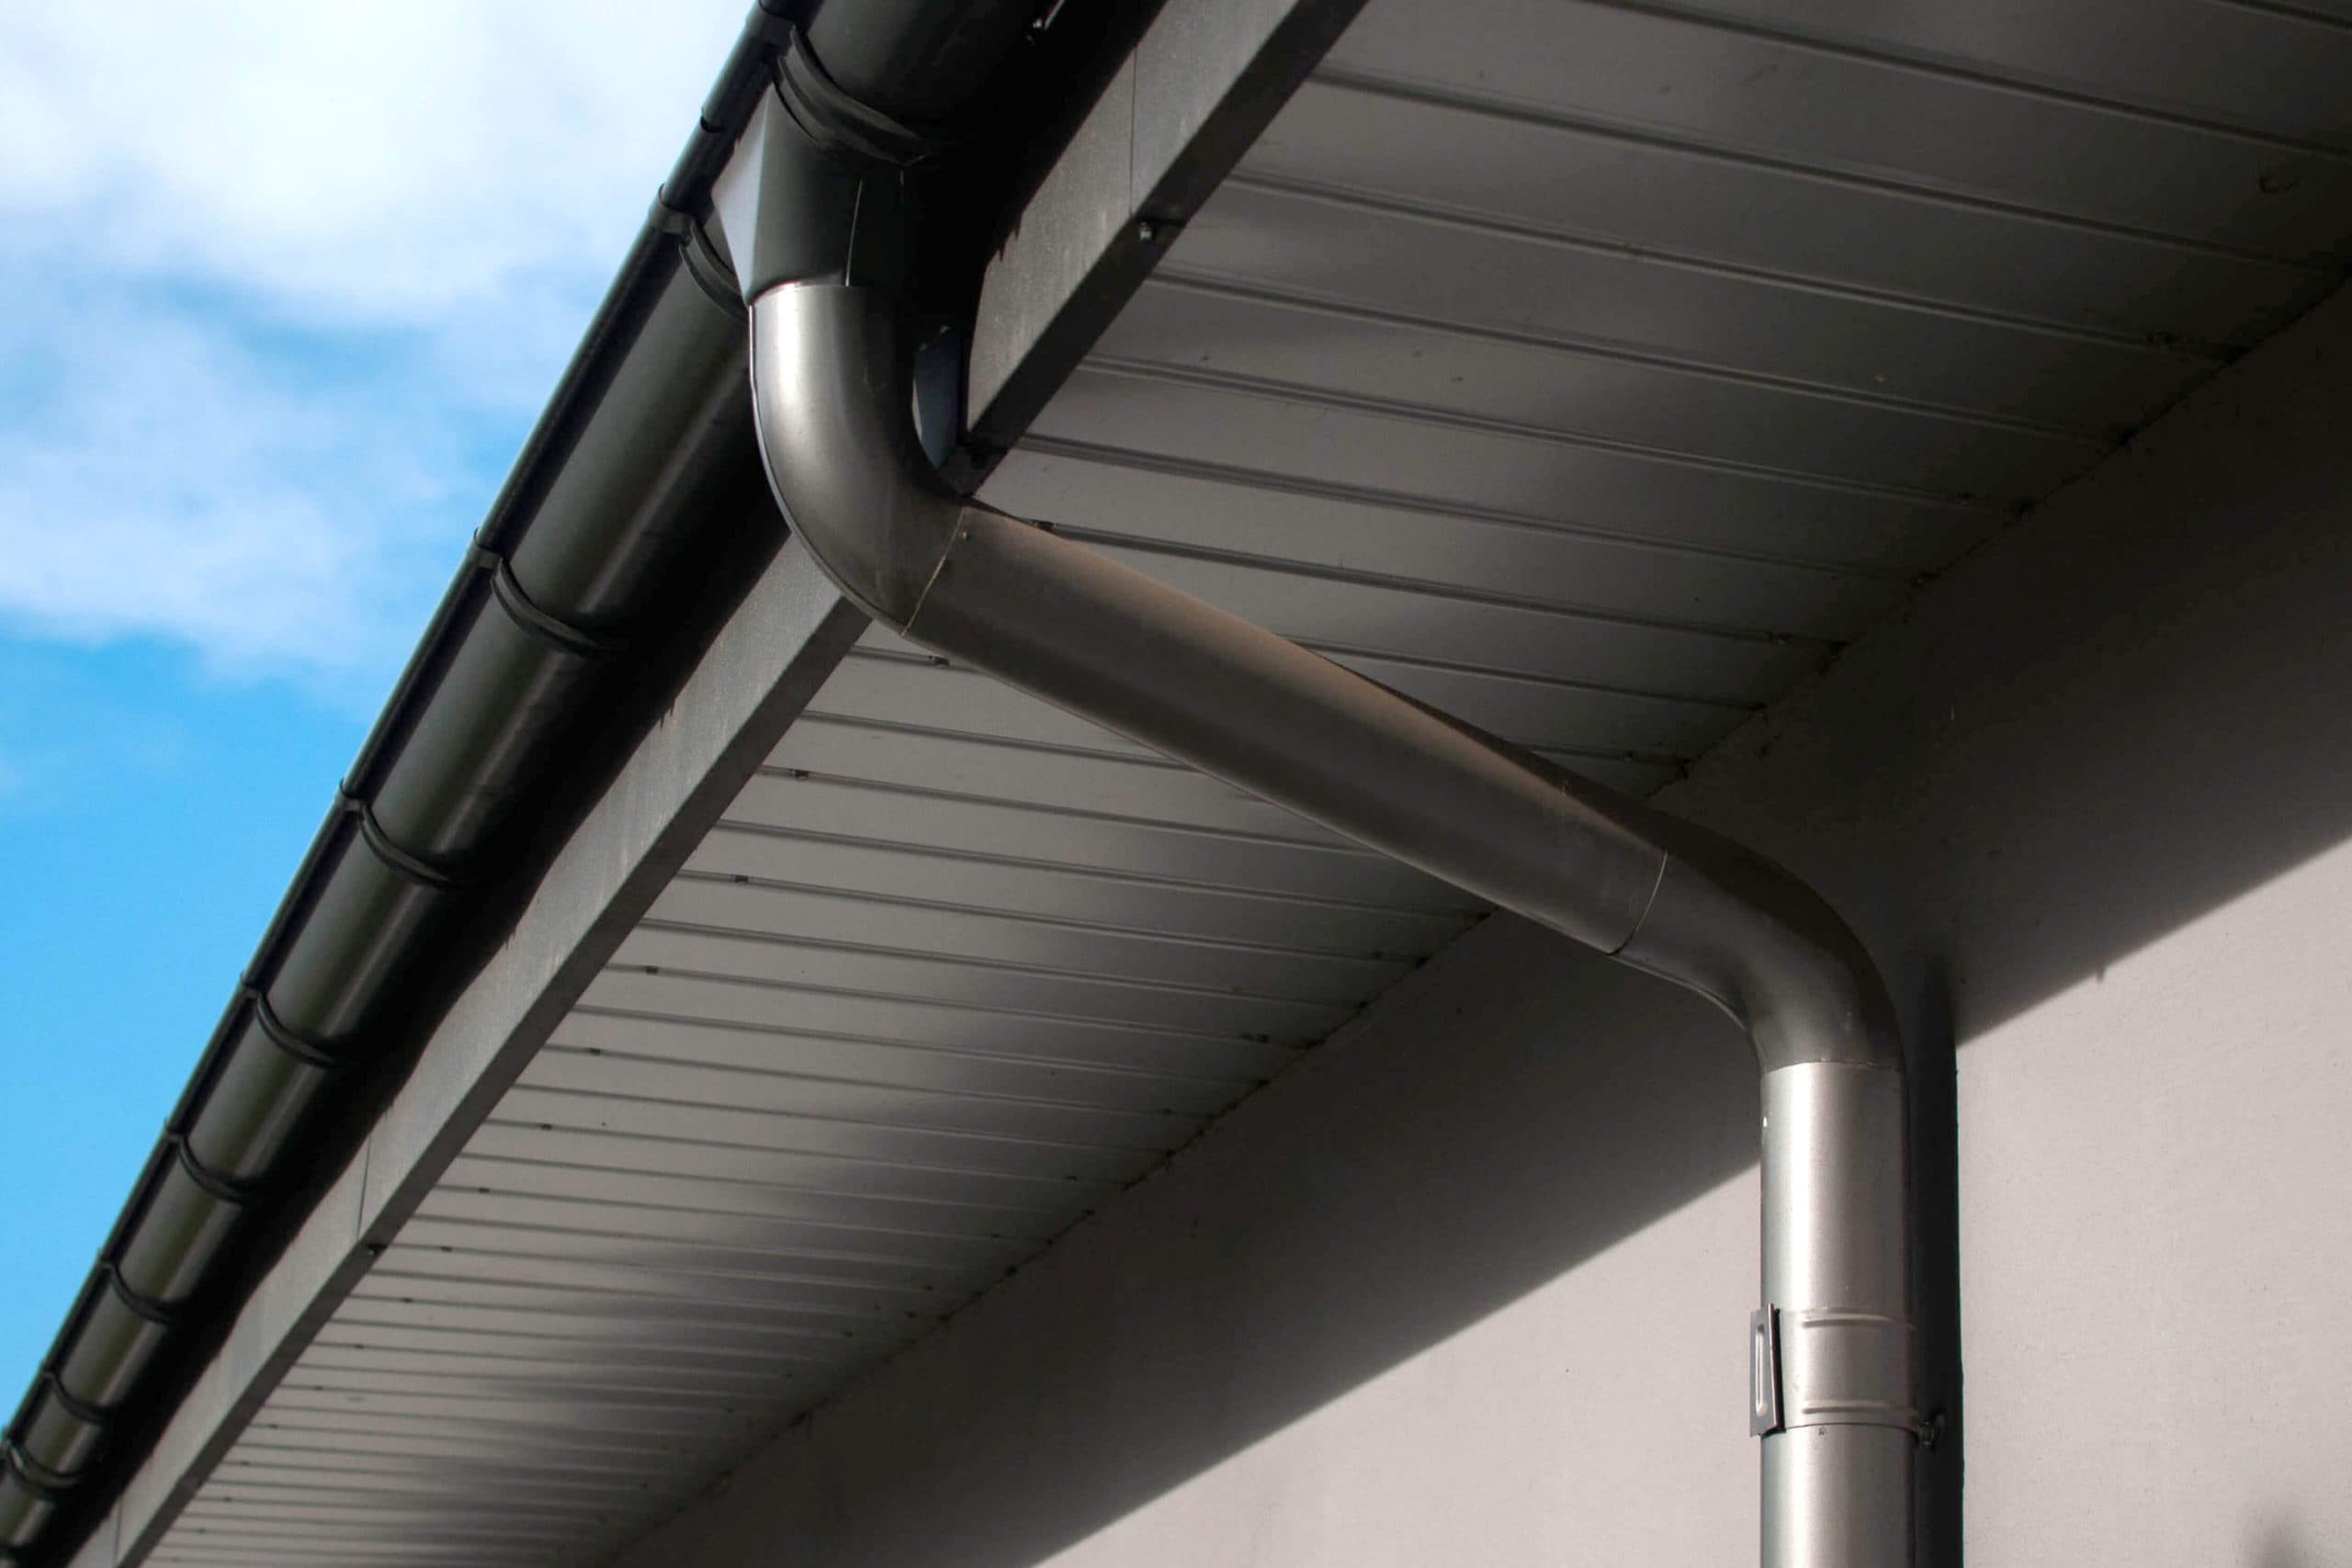 Corrosion-resistant galvanized gutters installed on a commercial building in San Jose